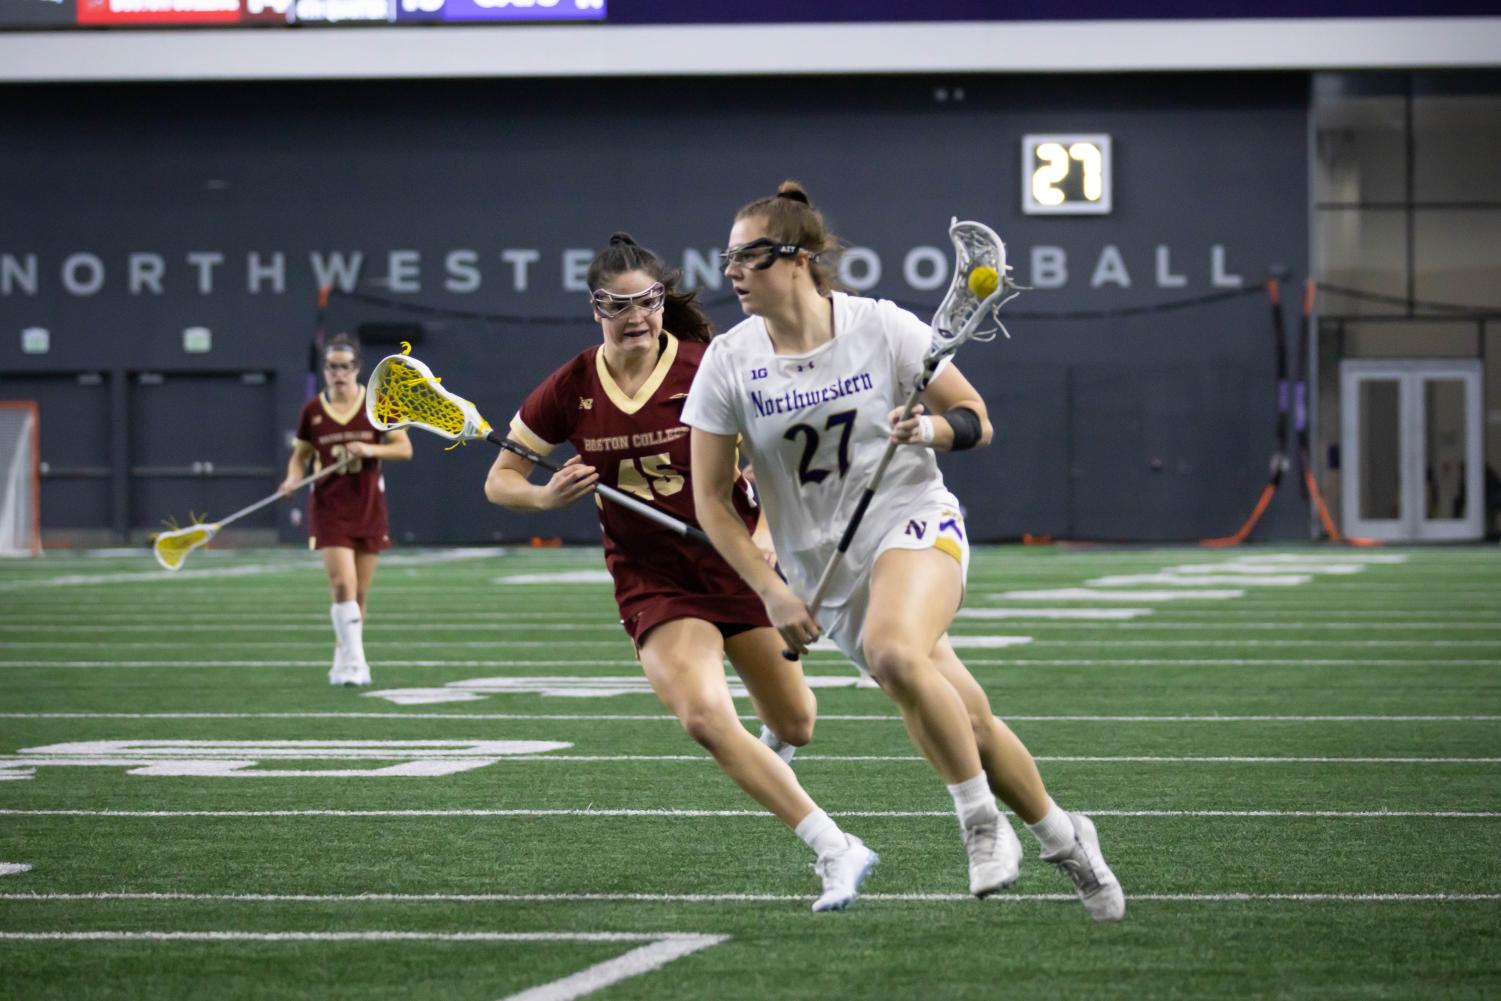 An+athlete+in+a+white+jersey+runs+with+a+lacrosse+stick.